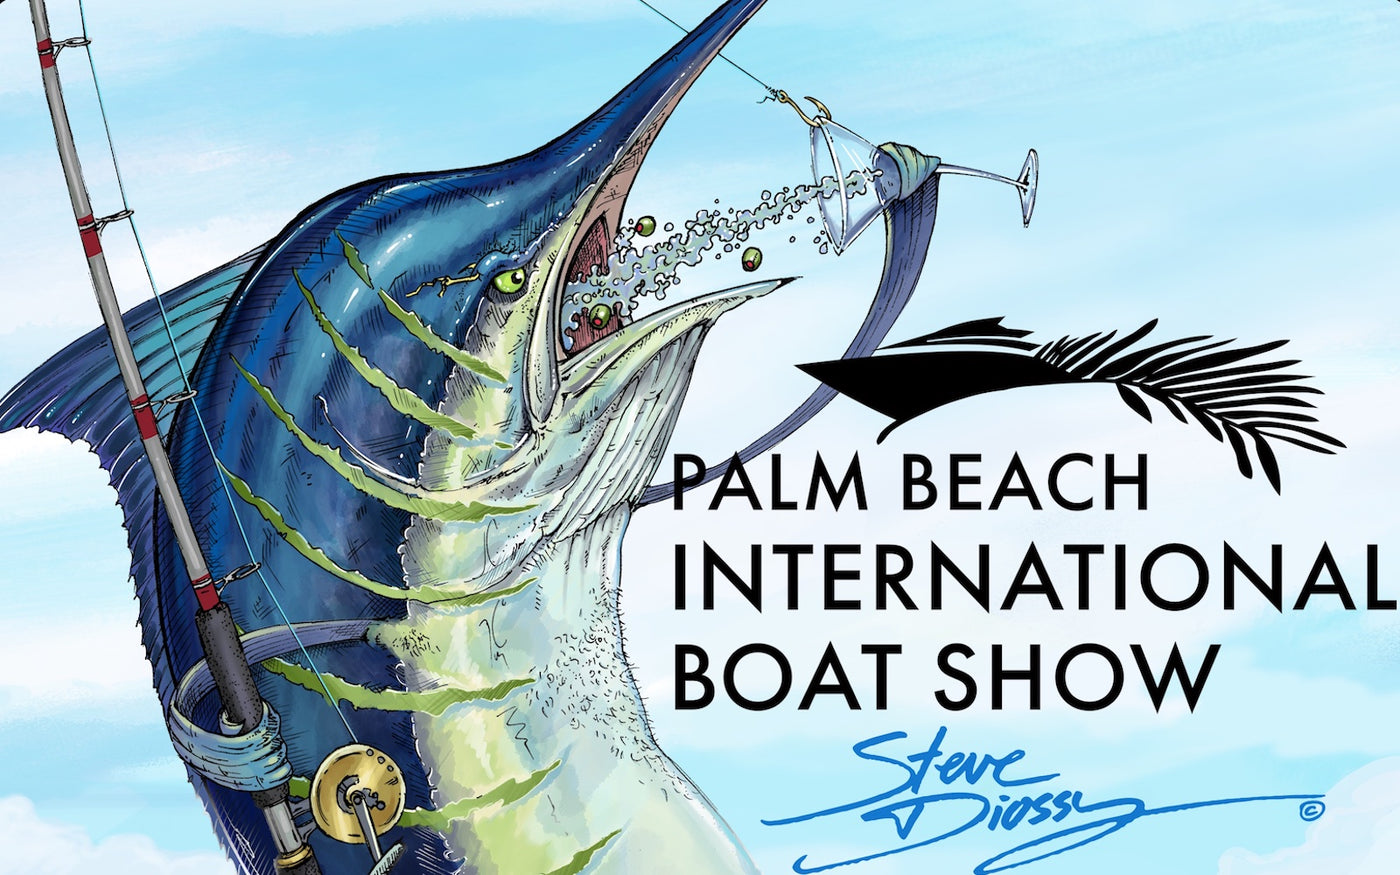 Steve Diossy Marine Artist: ART, SHIRTS & MORE for the Whole Family!